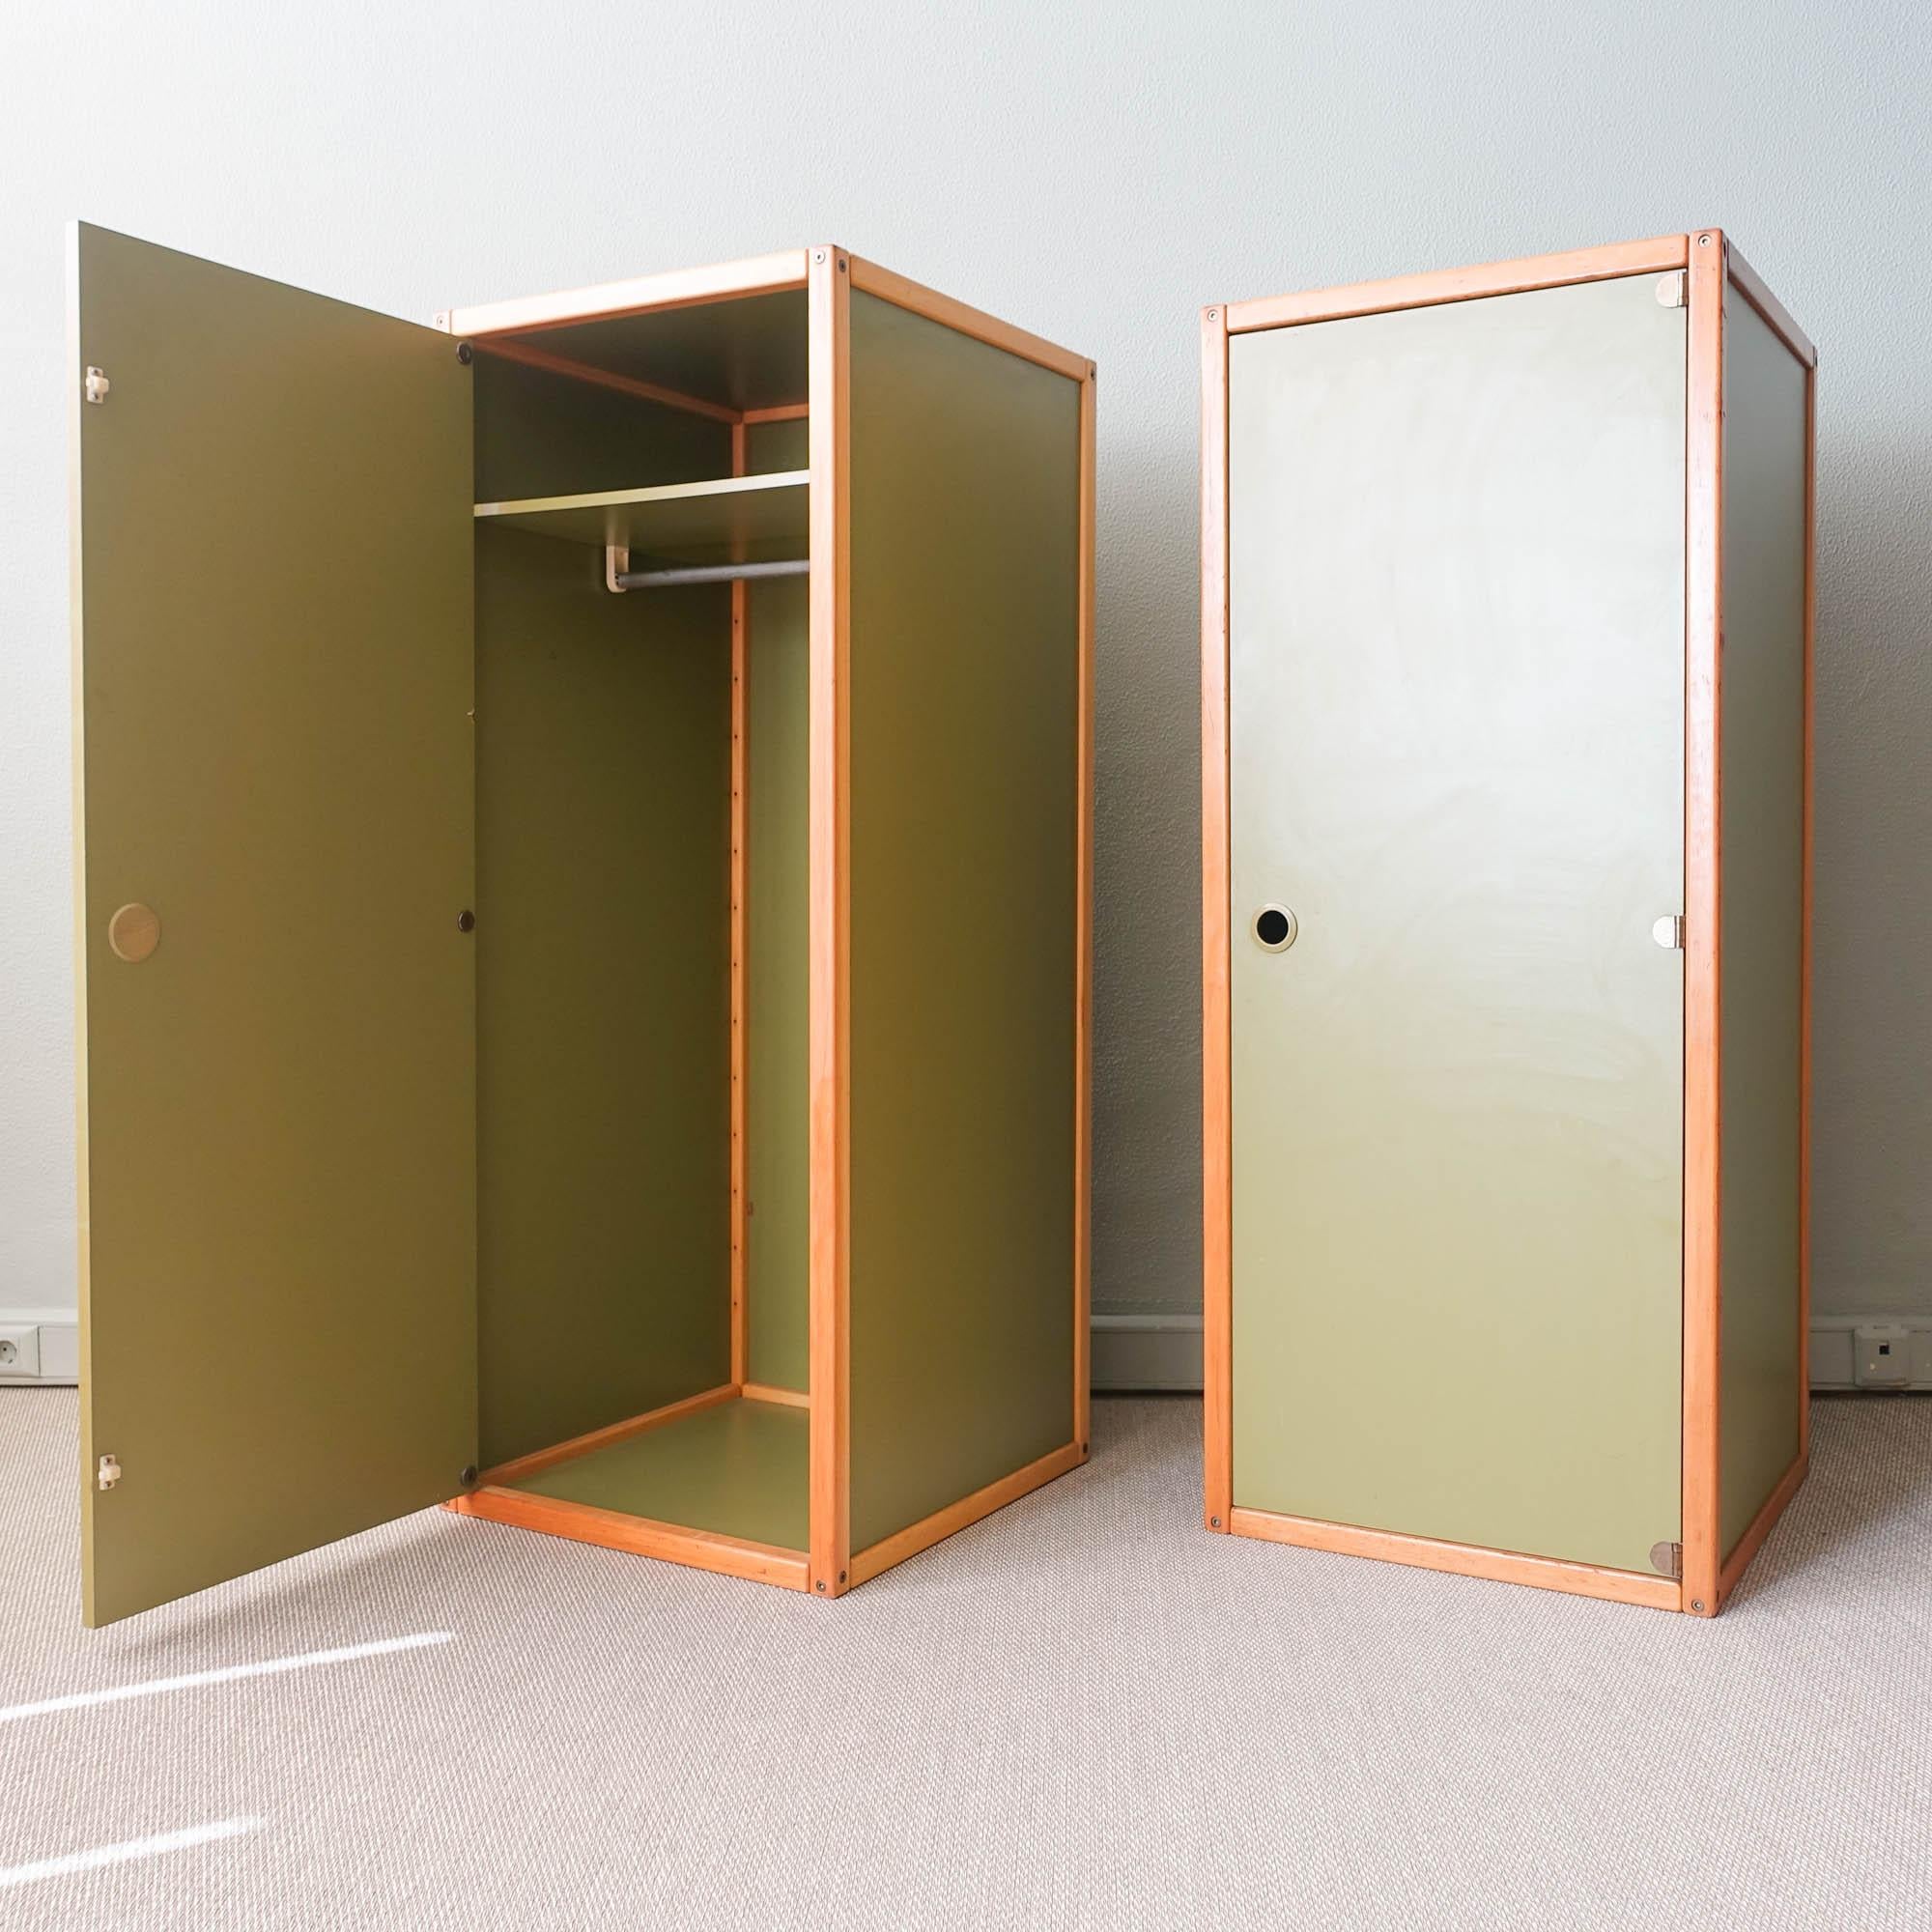 This pair of wardrobes from the Profilsystem Collection, was designed by Elmar Flötotto for Flötotto, in Germany, during the 1980's. The principle behind the Profilsystem it is simple. The modules can be easily combined with one another. They become